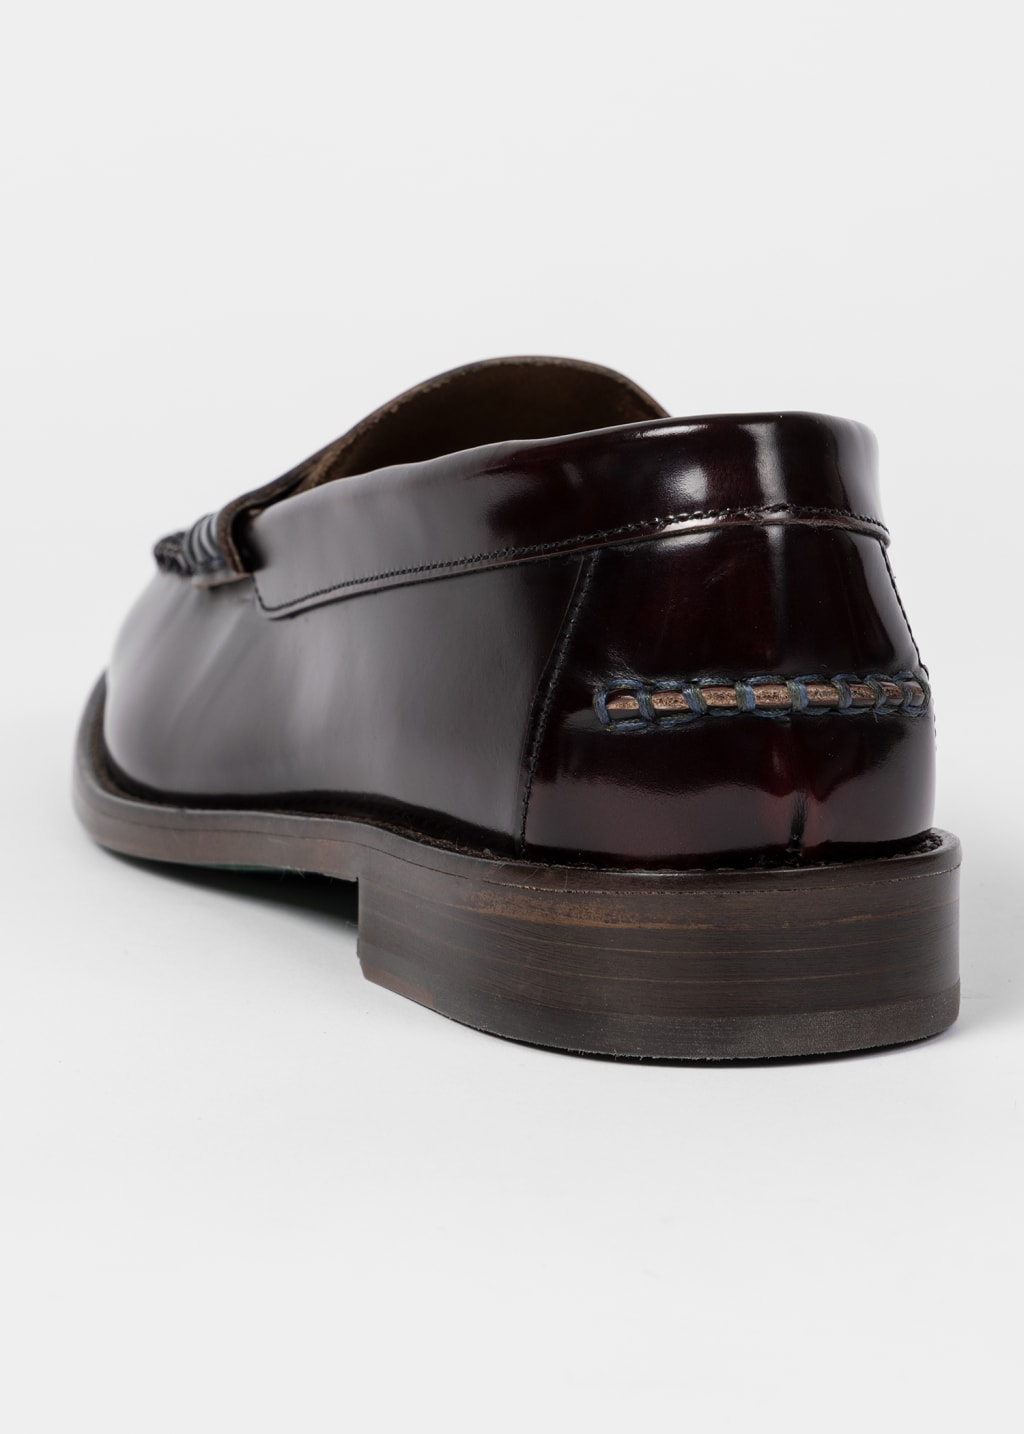 Detail View - Bordeaux High-Shine Leather 'Lido' Loafers Paul Smith